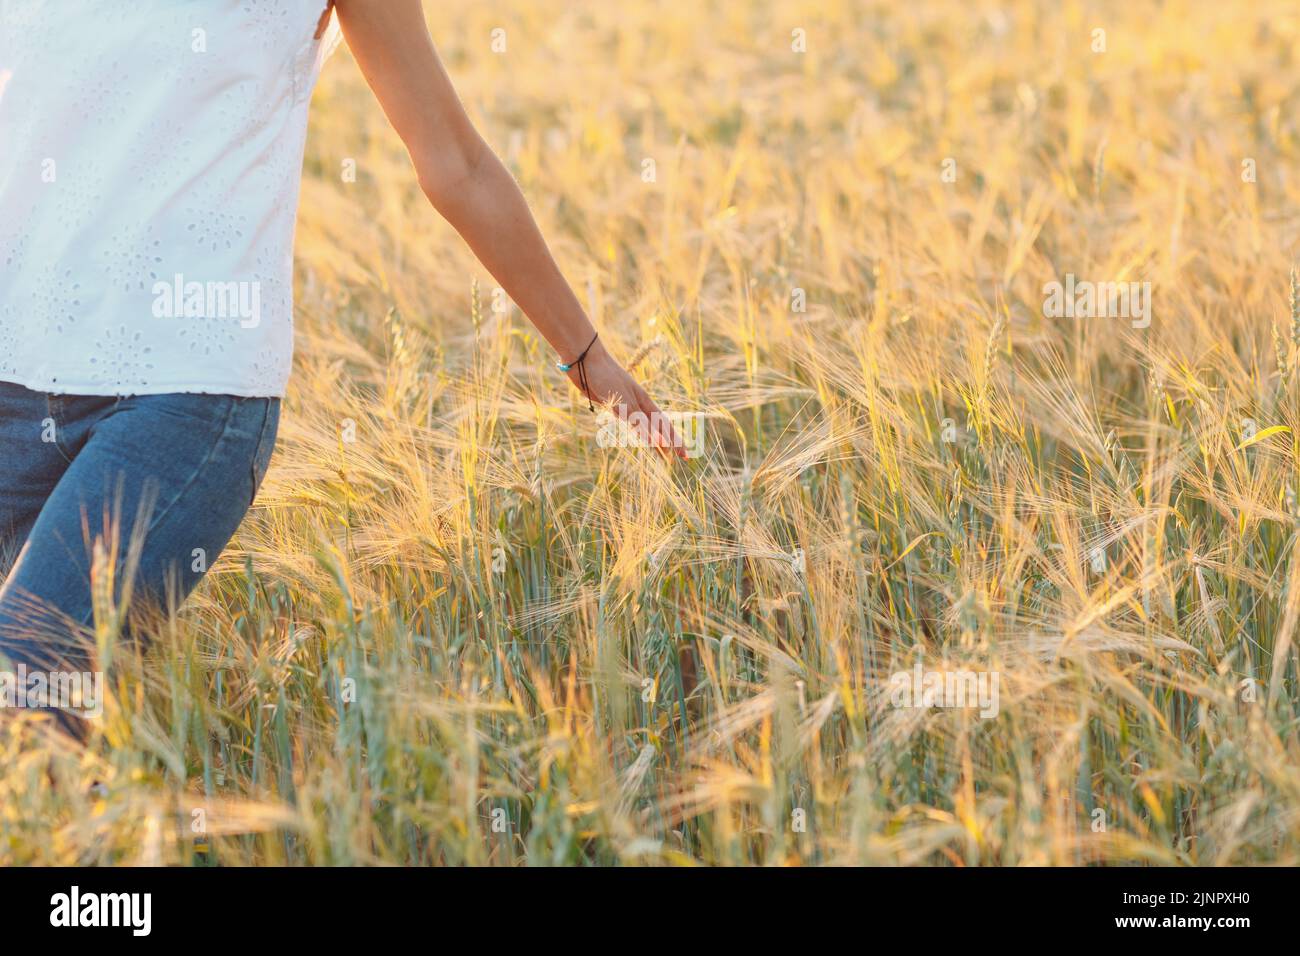 Woman farmer in cowboy hat walking with hands on ears at agricultural wheat field on sunset. Stock Photo